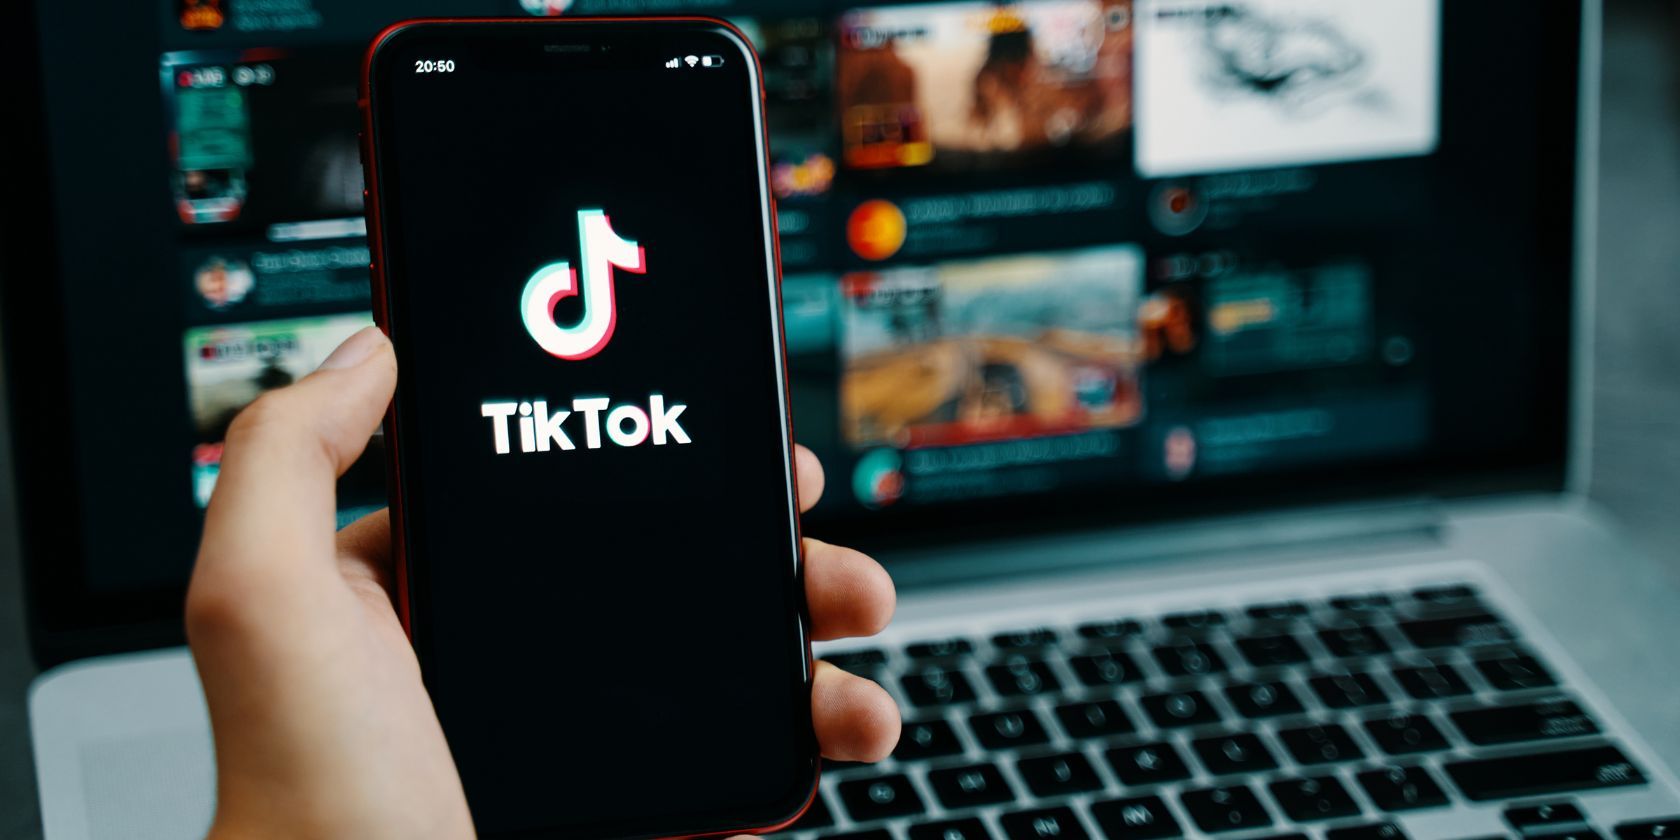 the tiktok logo on a smartphone in front of a laptop